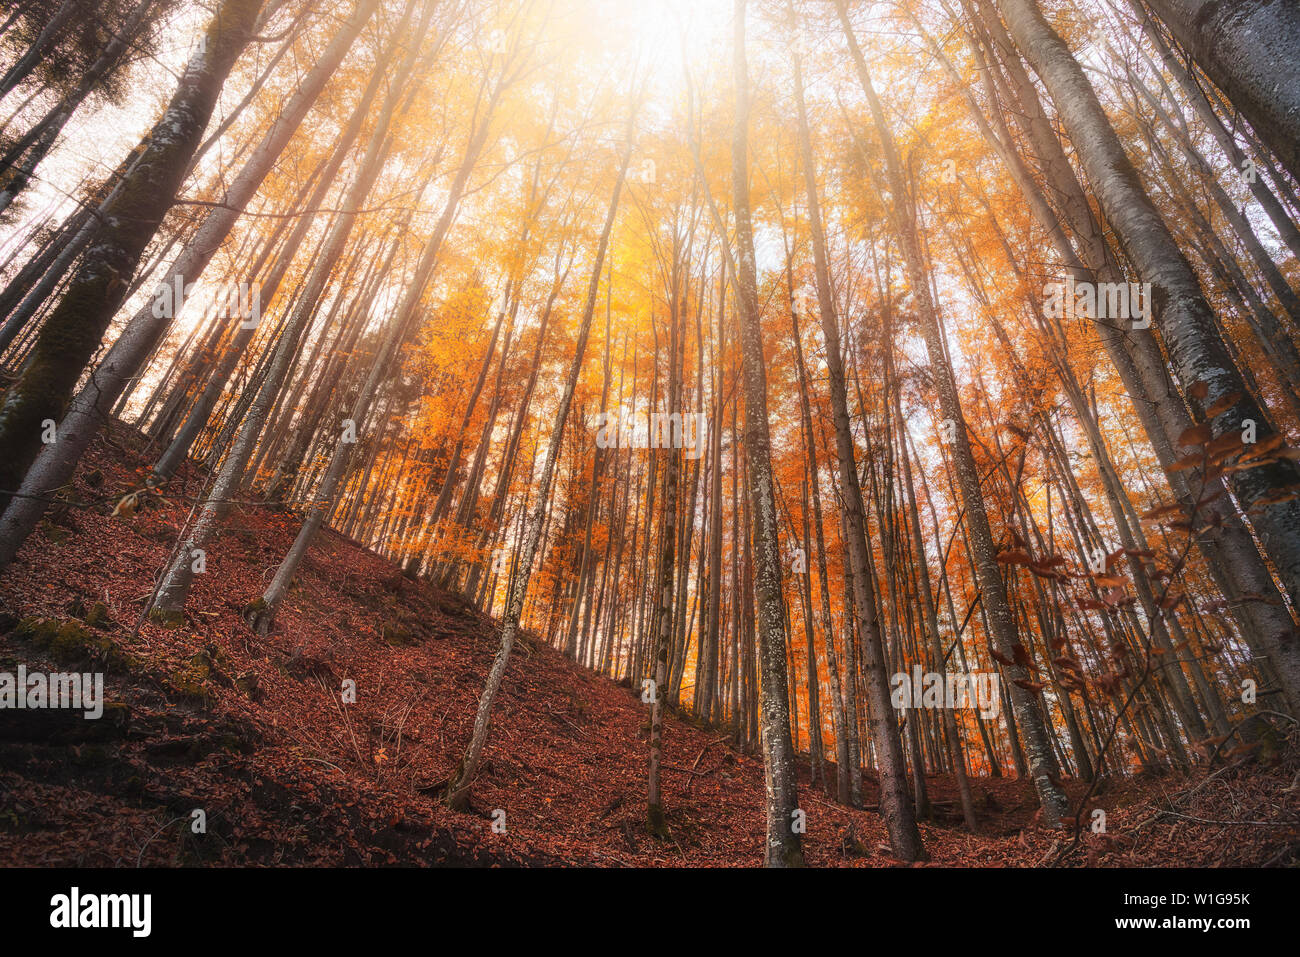 Autumn forest background. Forest landscape with the trees in the golden colors of fall. Sunny day of autumn in the woods, near Fussen, Germany. Stock Photo